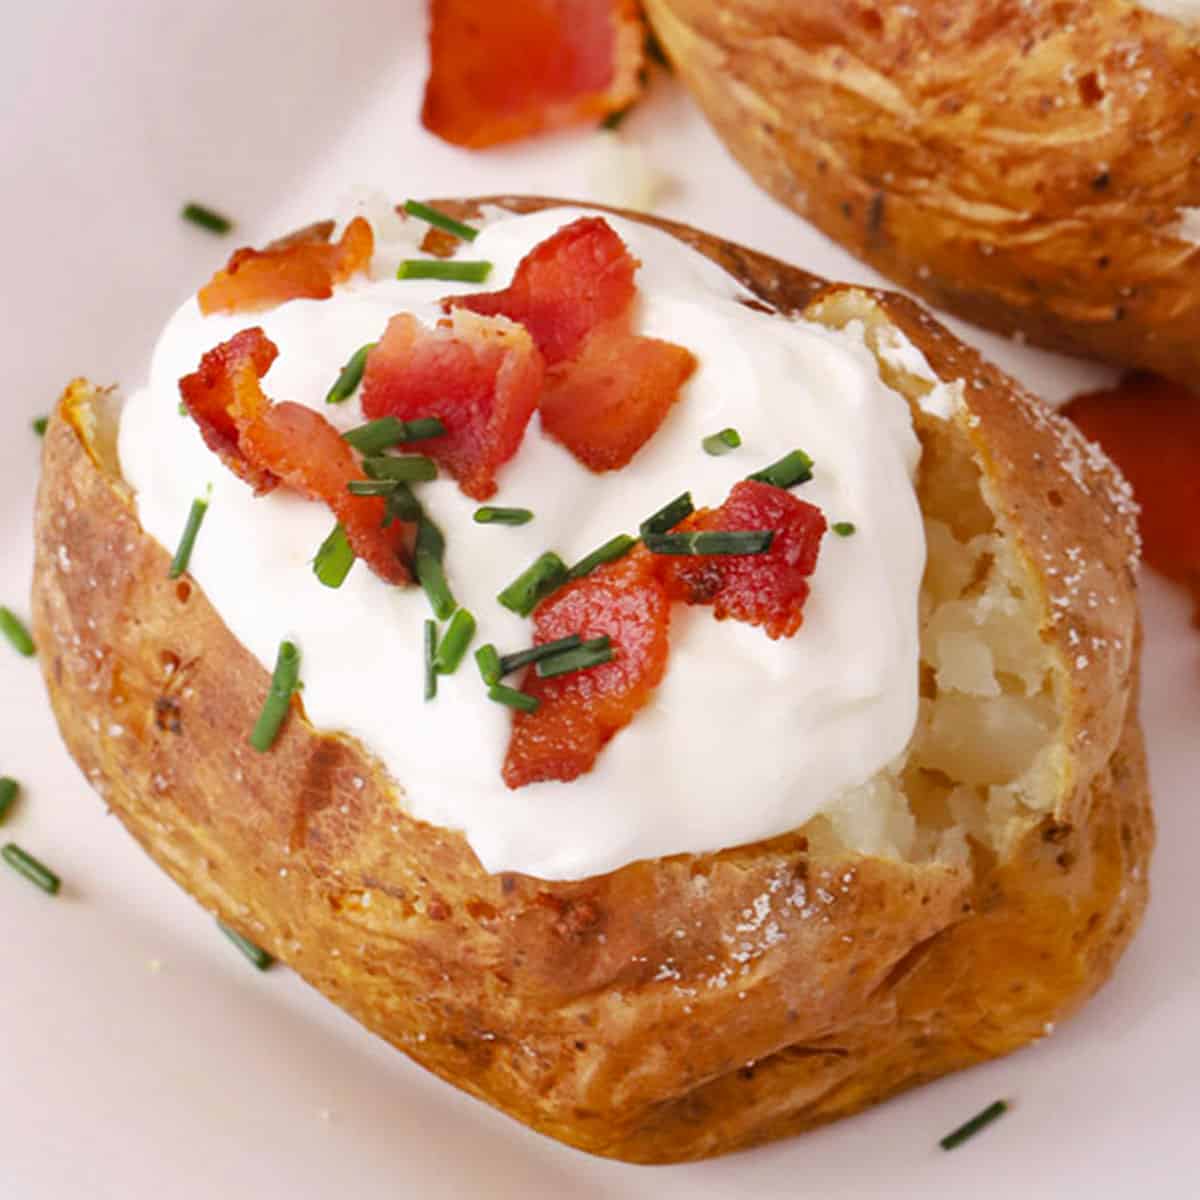 air fryer baked potatoes recipe with toppings, baked potato recipe air fryer.